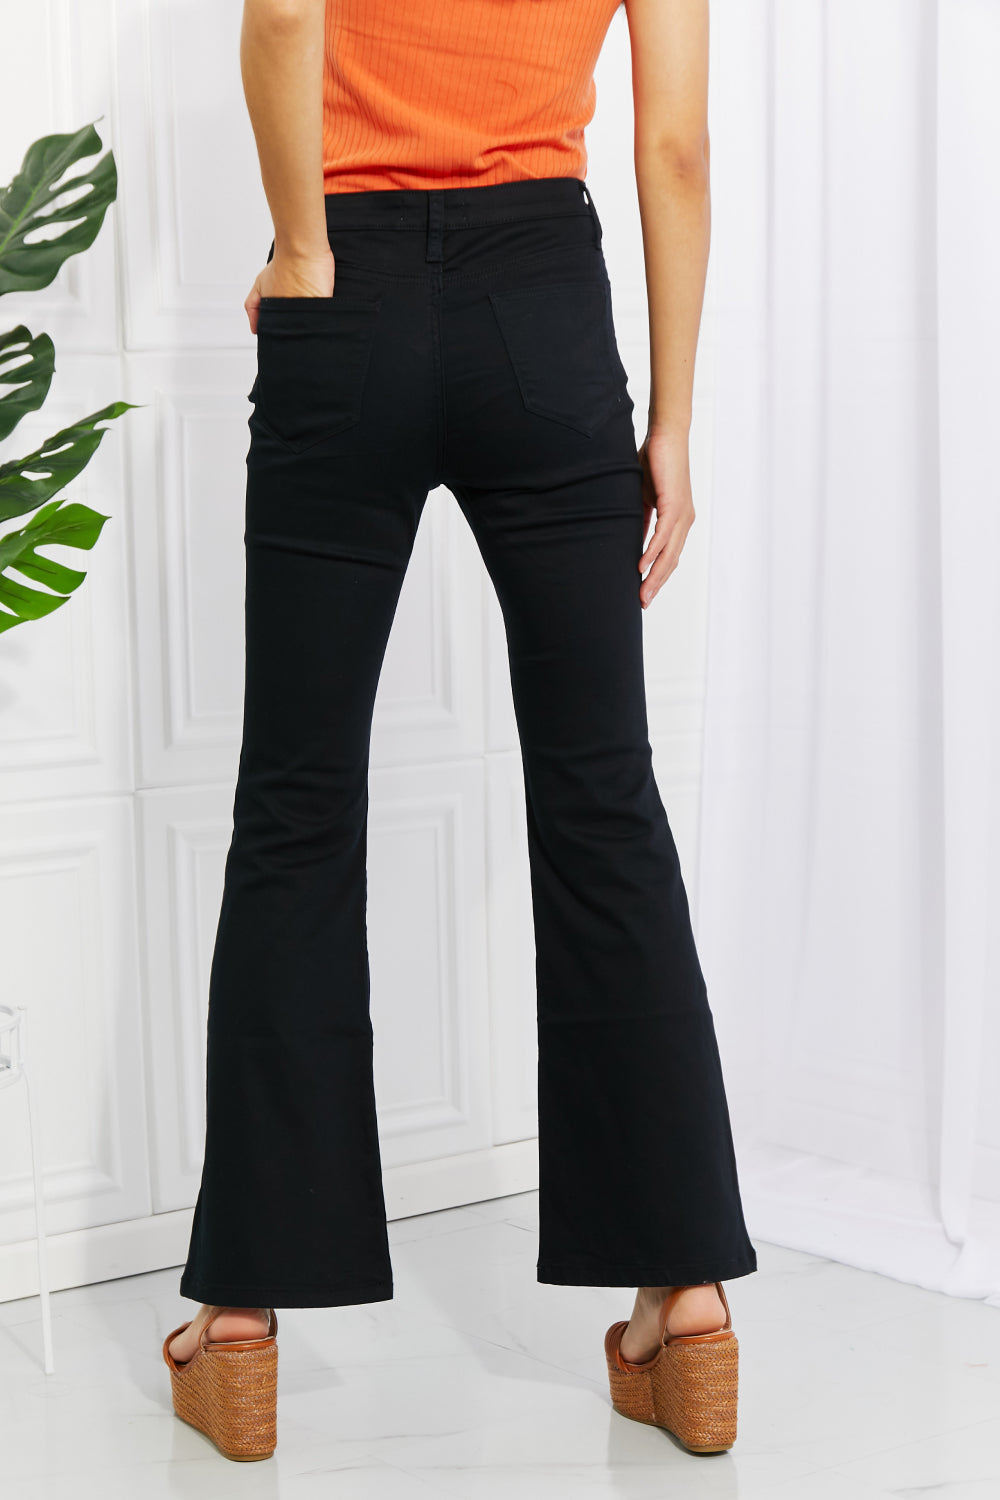 Clementine High-Rise Bootcut Pants in Black